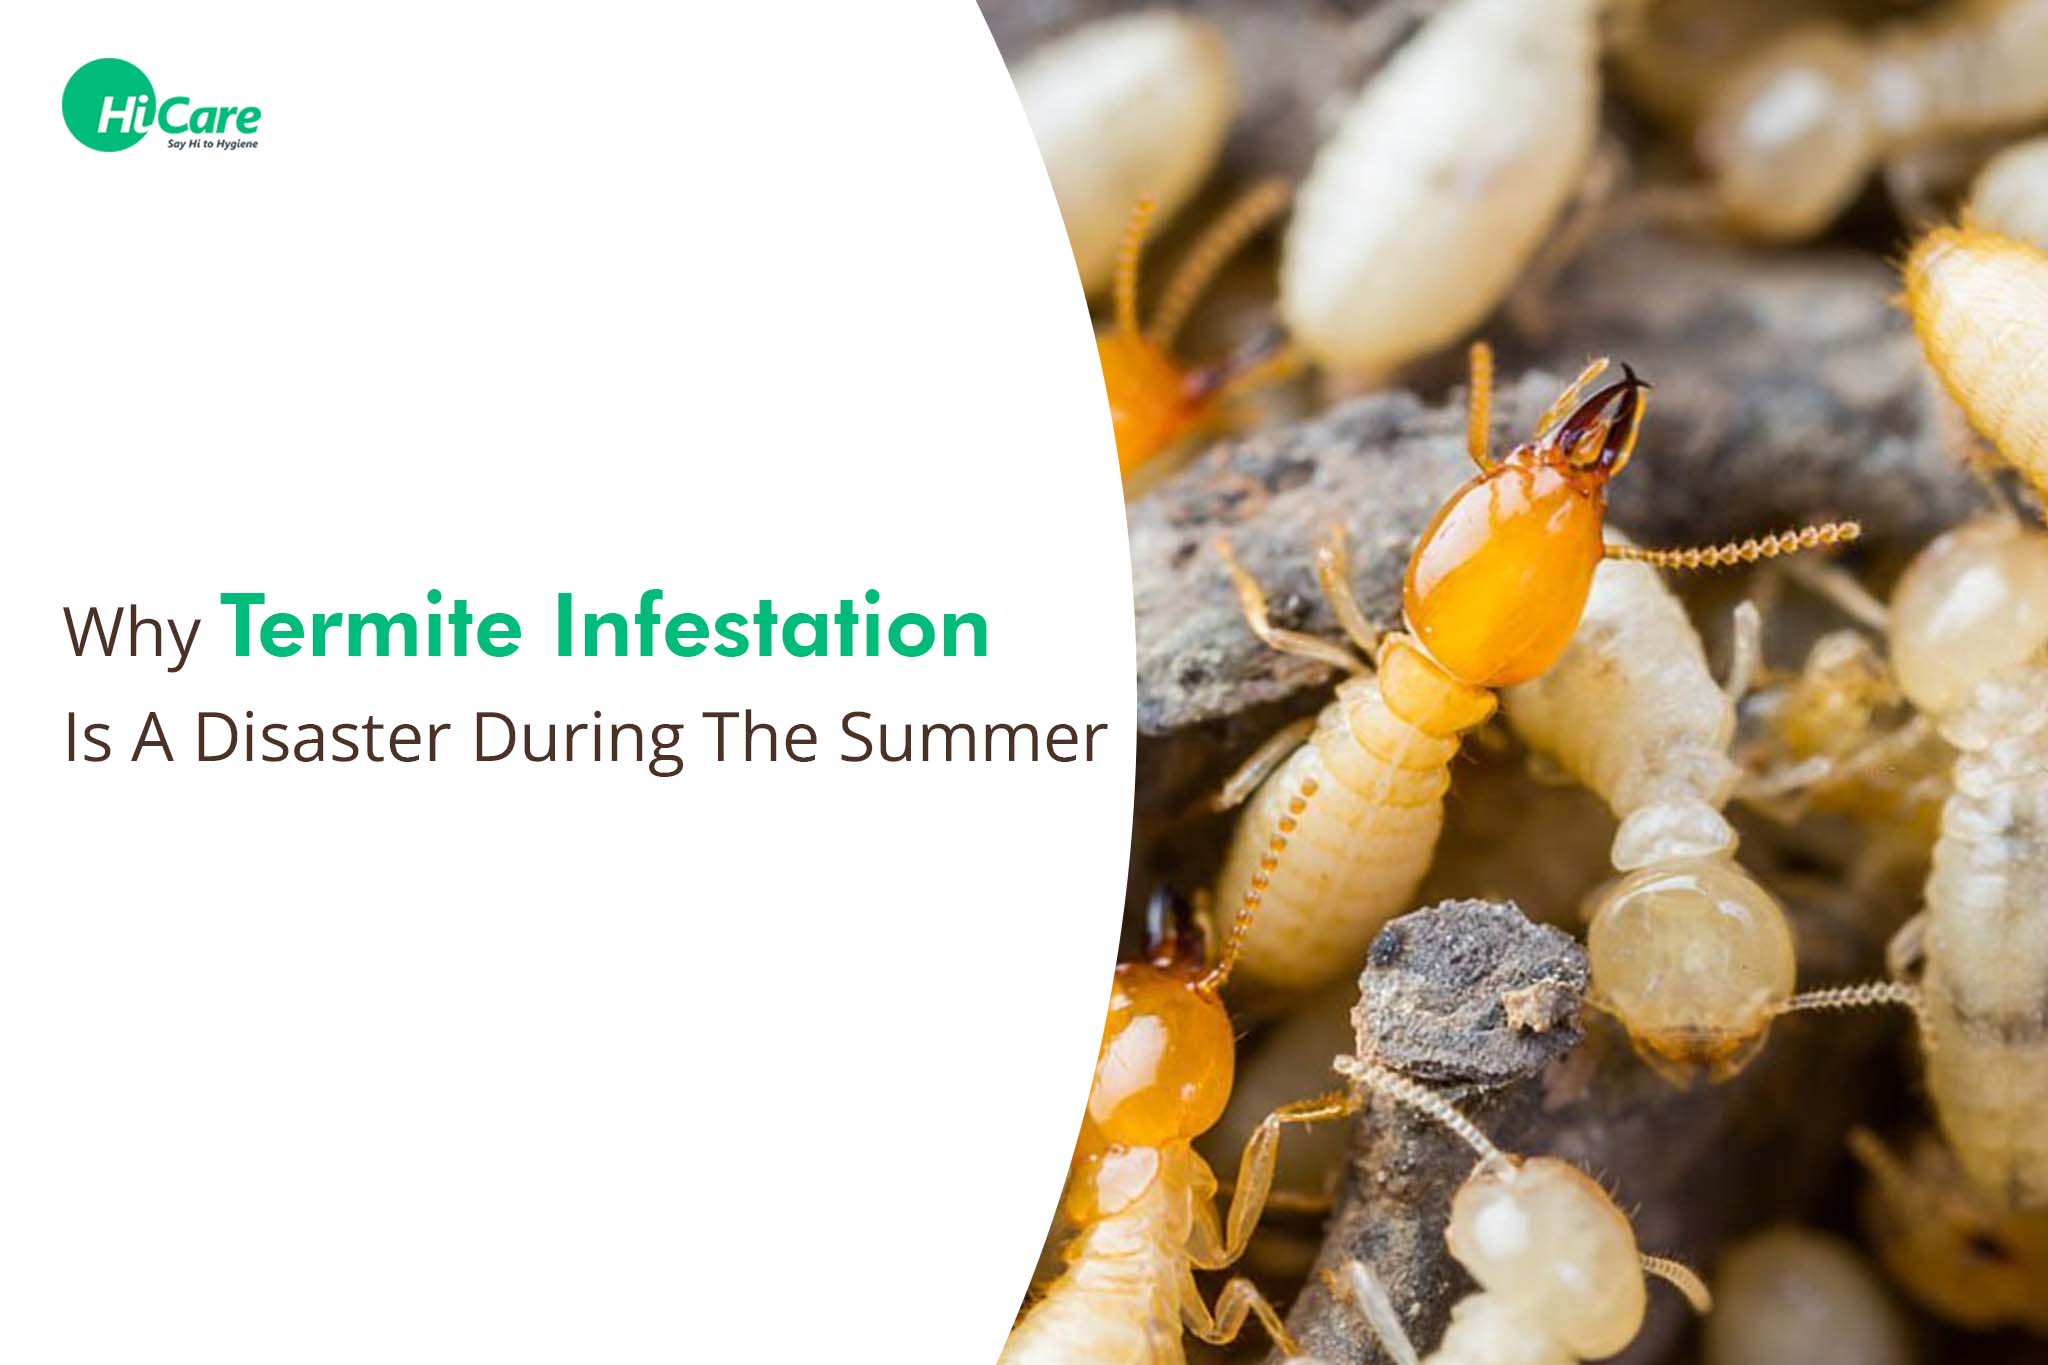 Why Termite Infestation is a Disaster During The Summer?